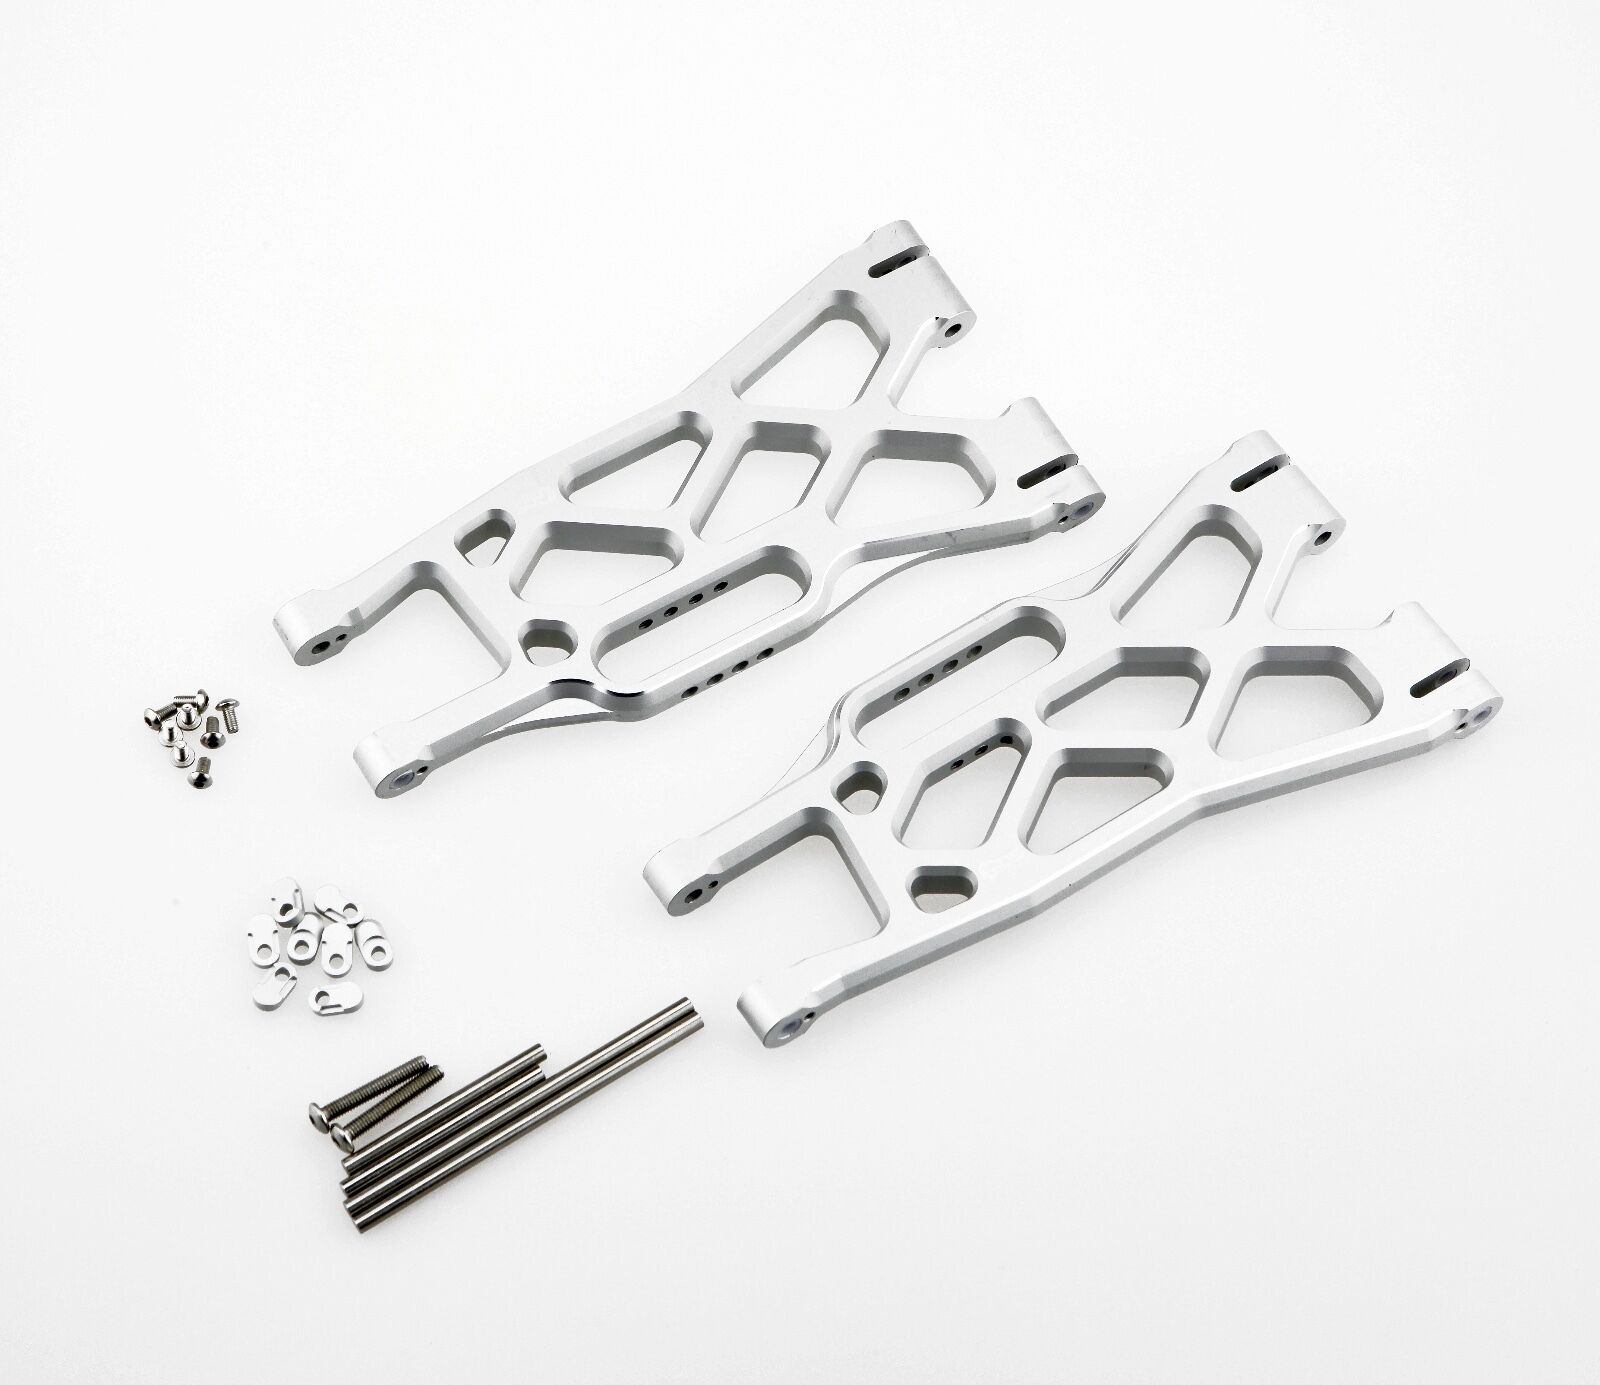 2pc GDS Racing Front Knuckle Arms Silver for Traxxas X-MAXX 1/5 RC Truck